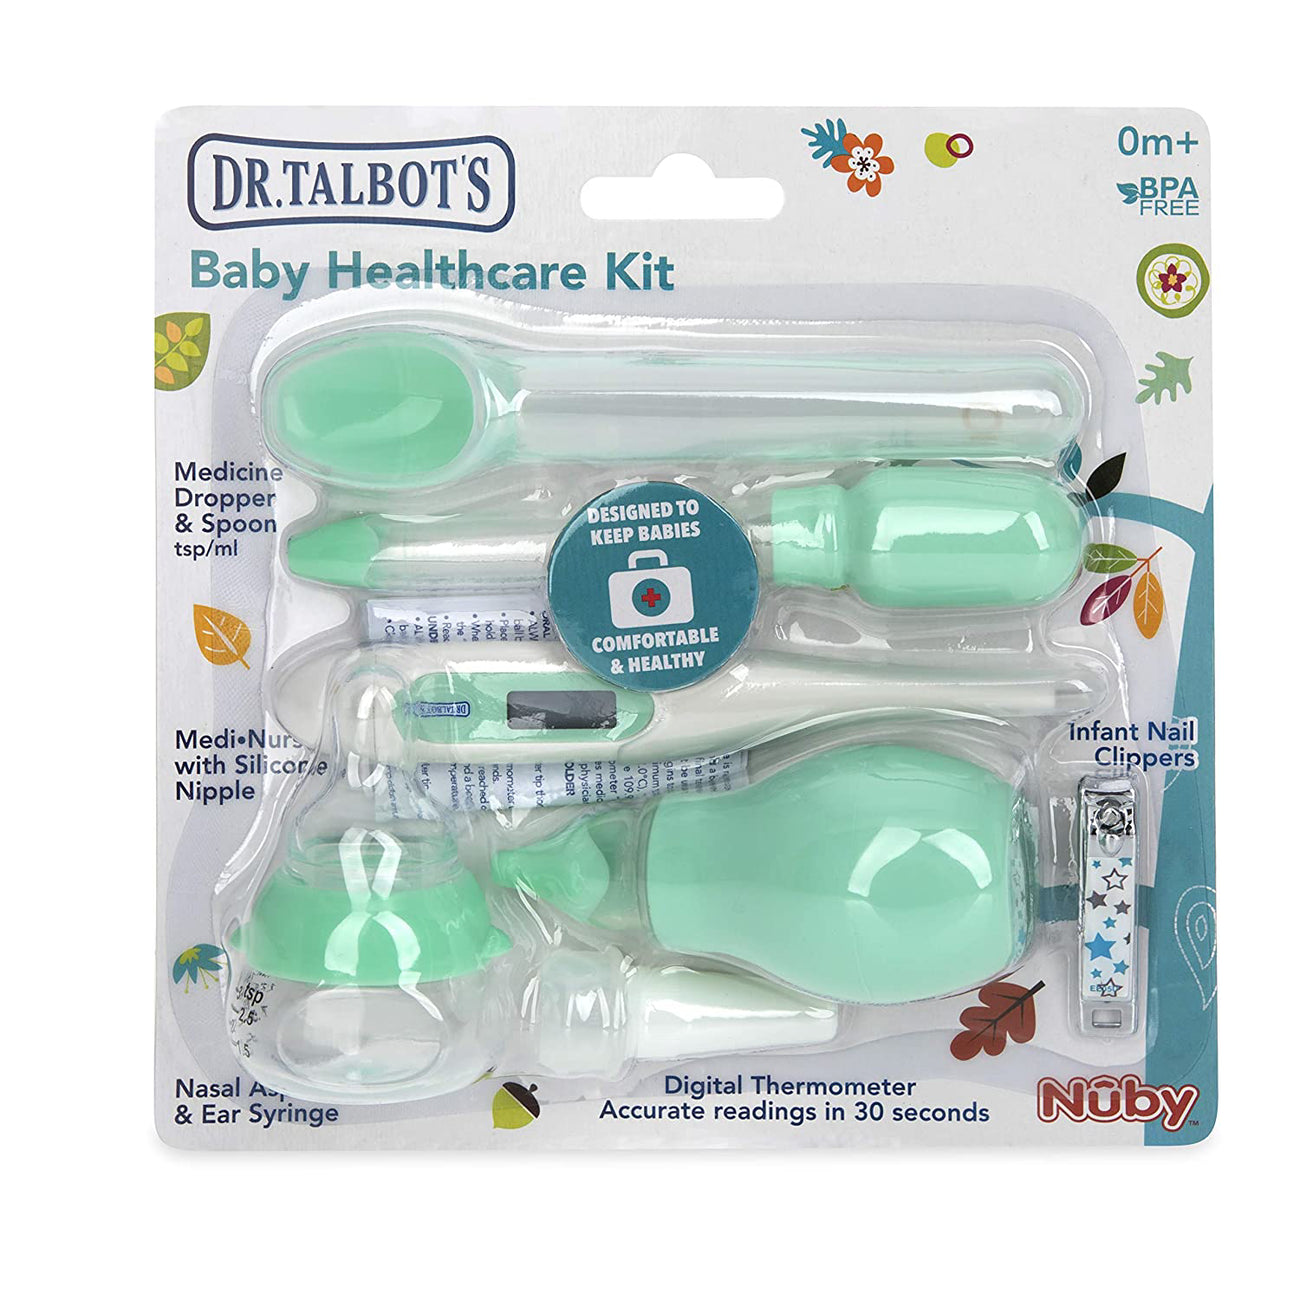 Complete Baby Healthcare Kit - 7 pieces - Dr Talbot's US